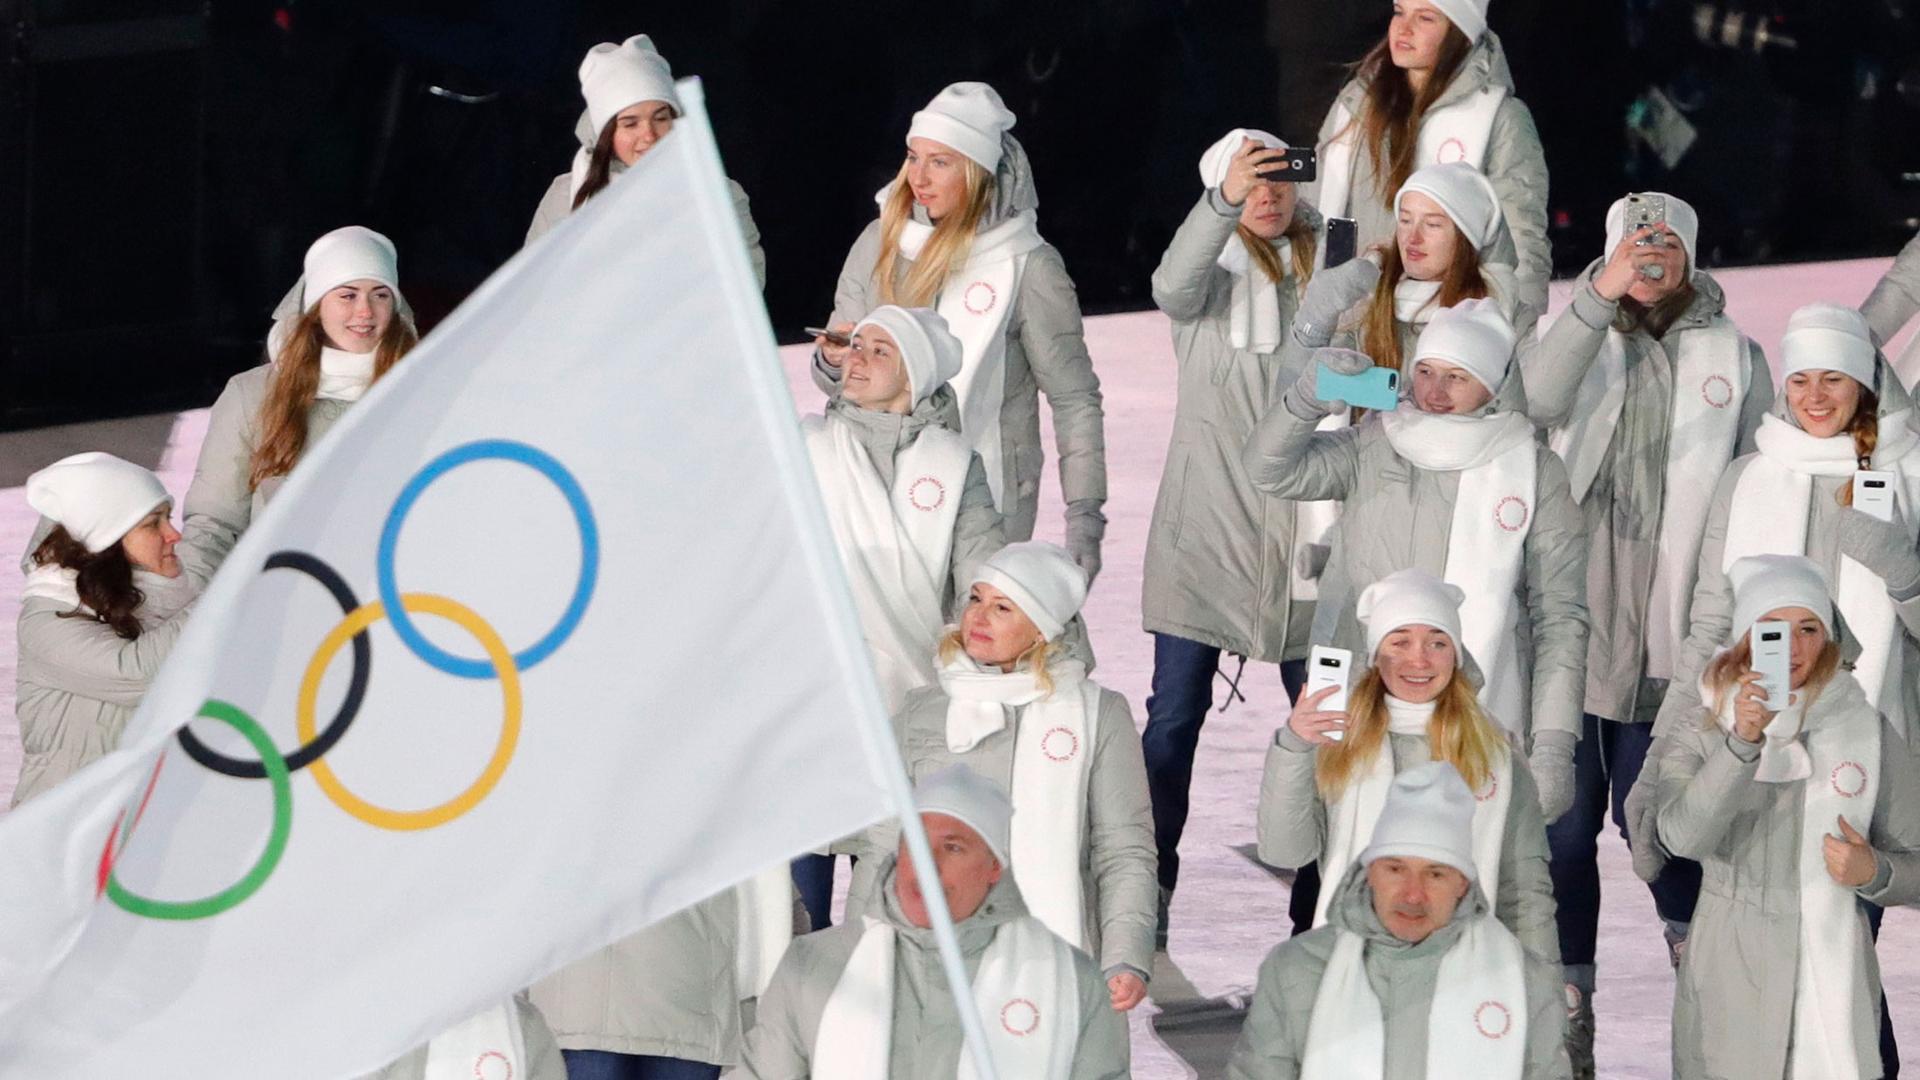 People dressed in white carry the Olympic flag instead of the Russian flag.